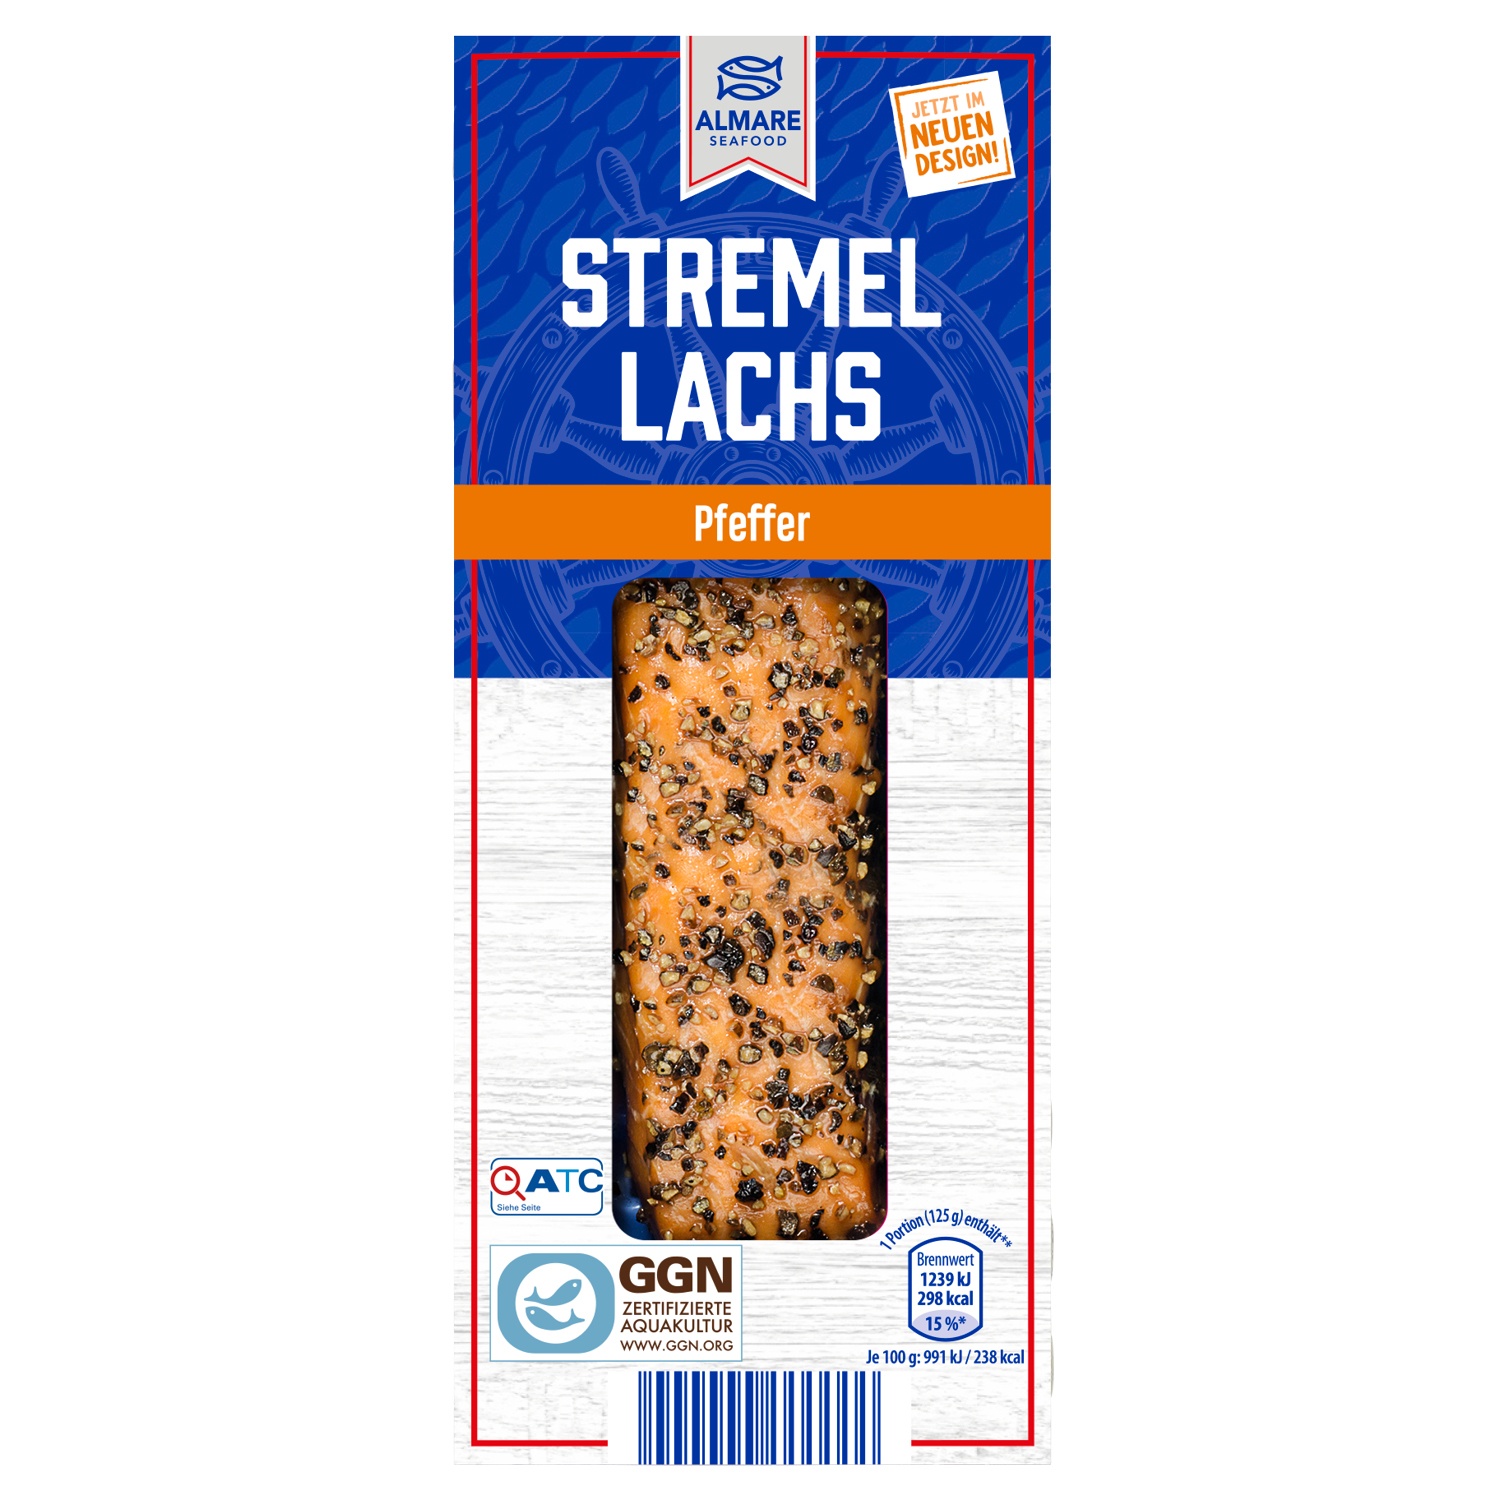 ALMARE SEAFOOD Stremellachs 125 g